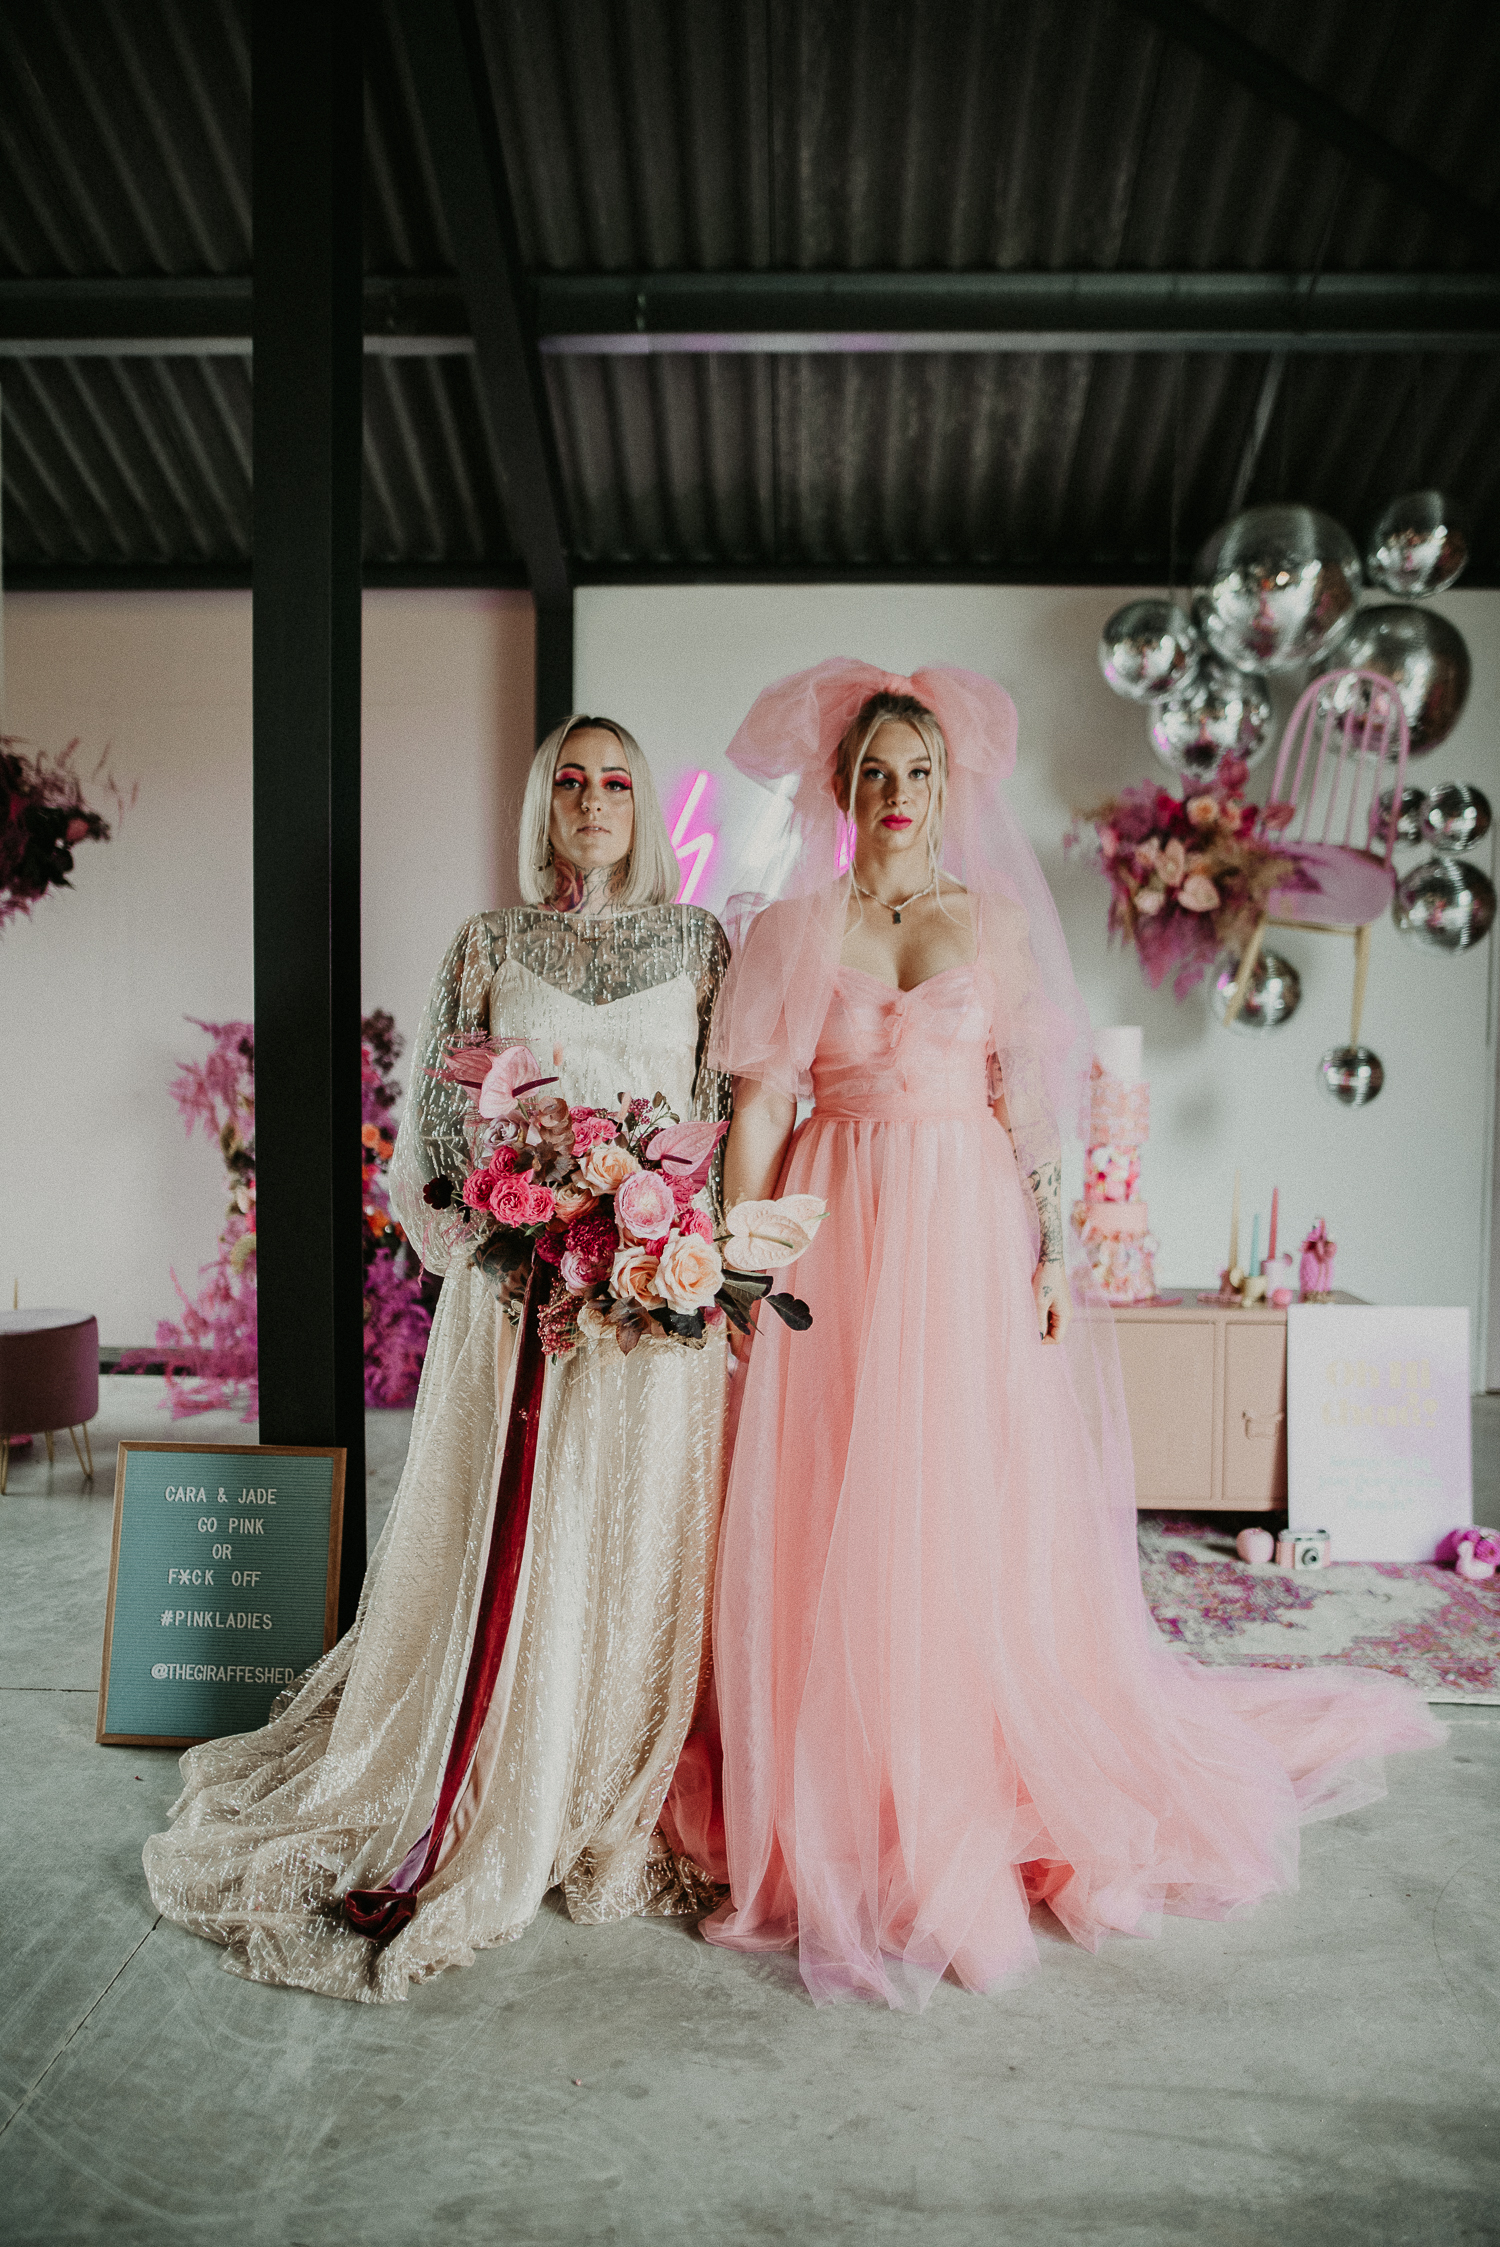 Same Sex wedding at the giraffe shed. Two brides in dresses, one pink and one white pose for a photo in front of a pink neon at the giraffe shed.